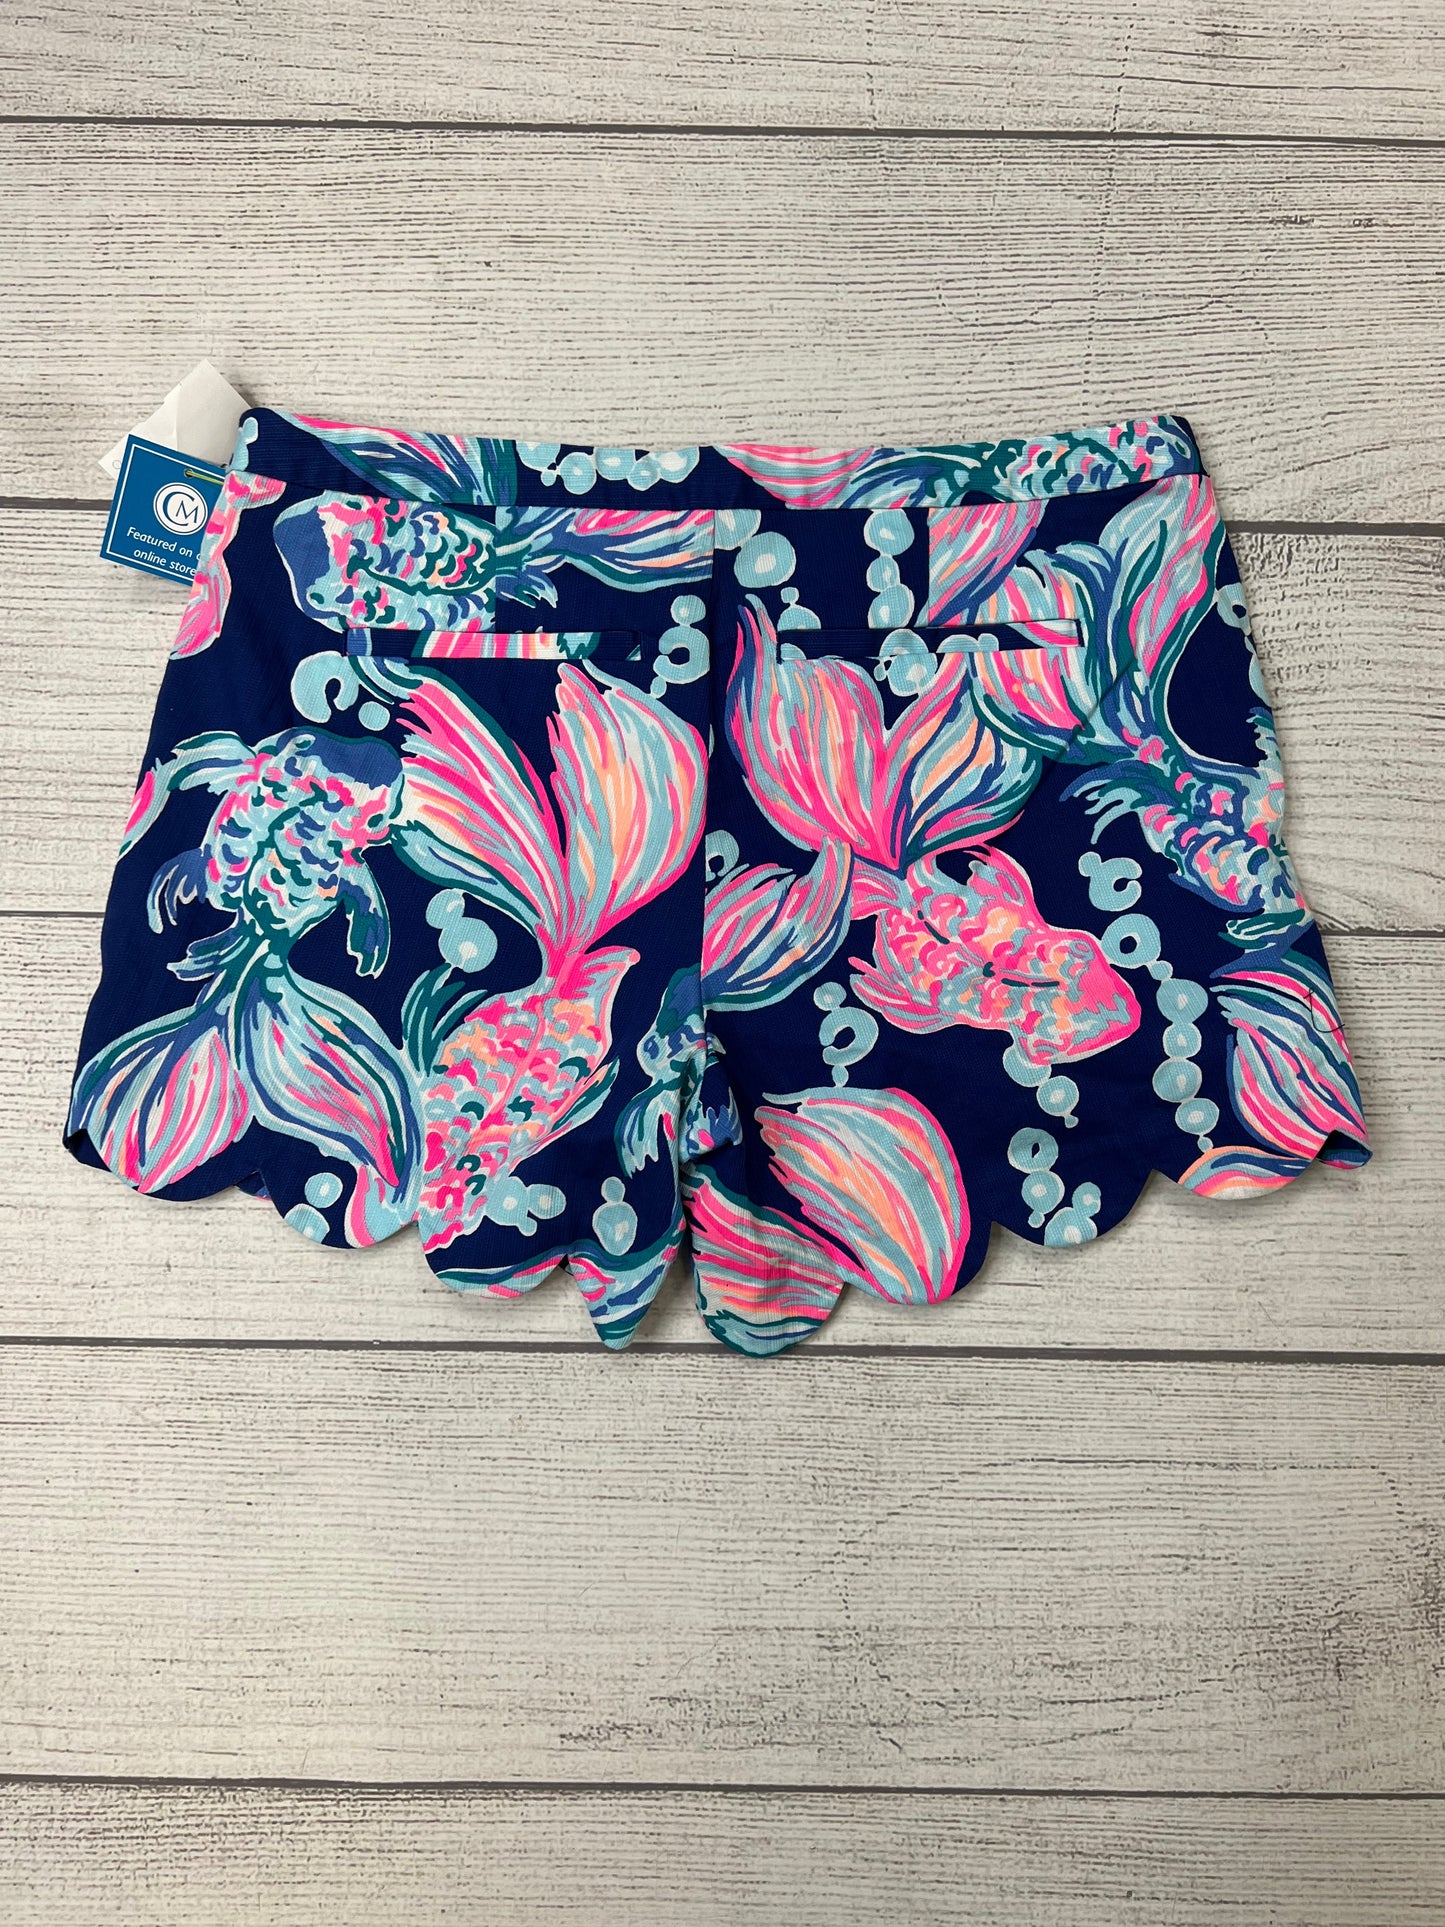 Print Shorts Lilly Pulitzer, Size 6